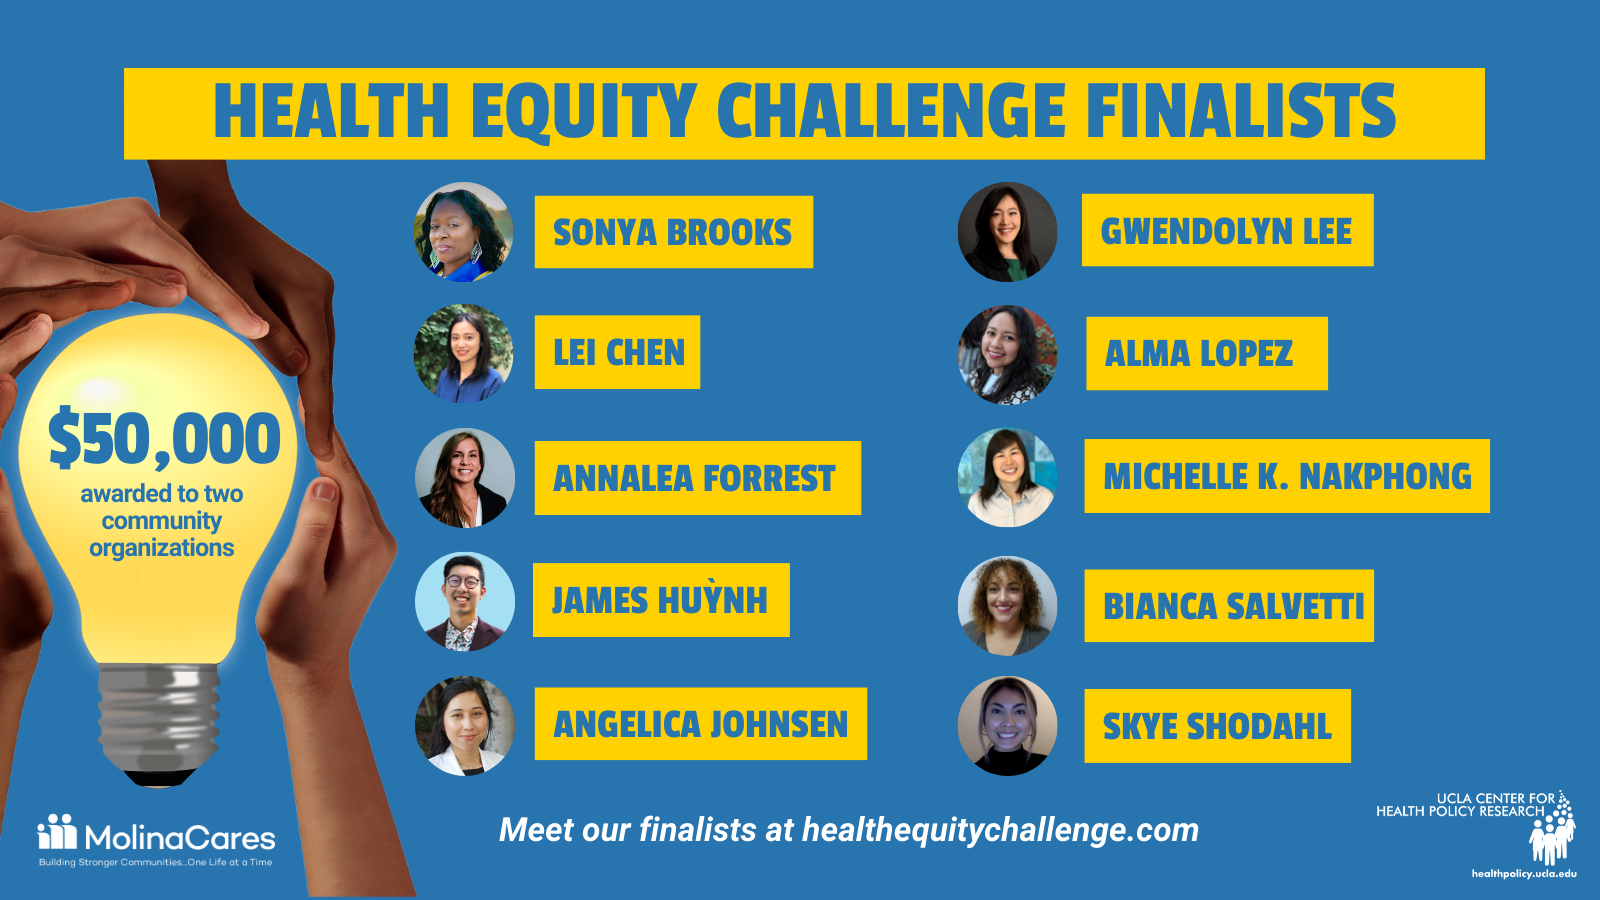 A graphic showing the 10 finalists of the Health Equity Challenge